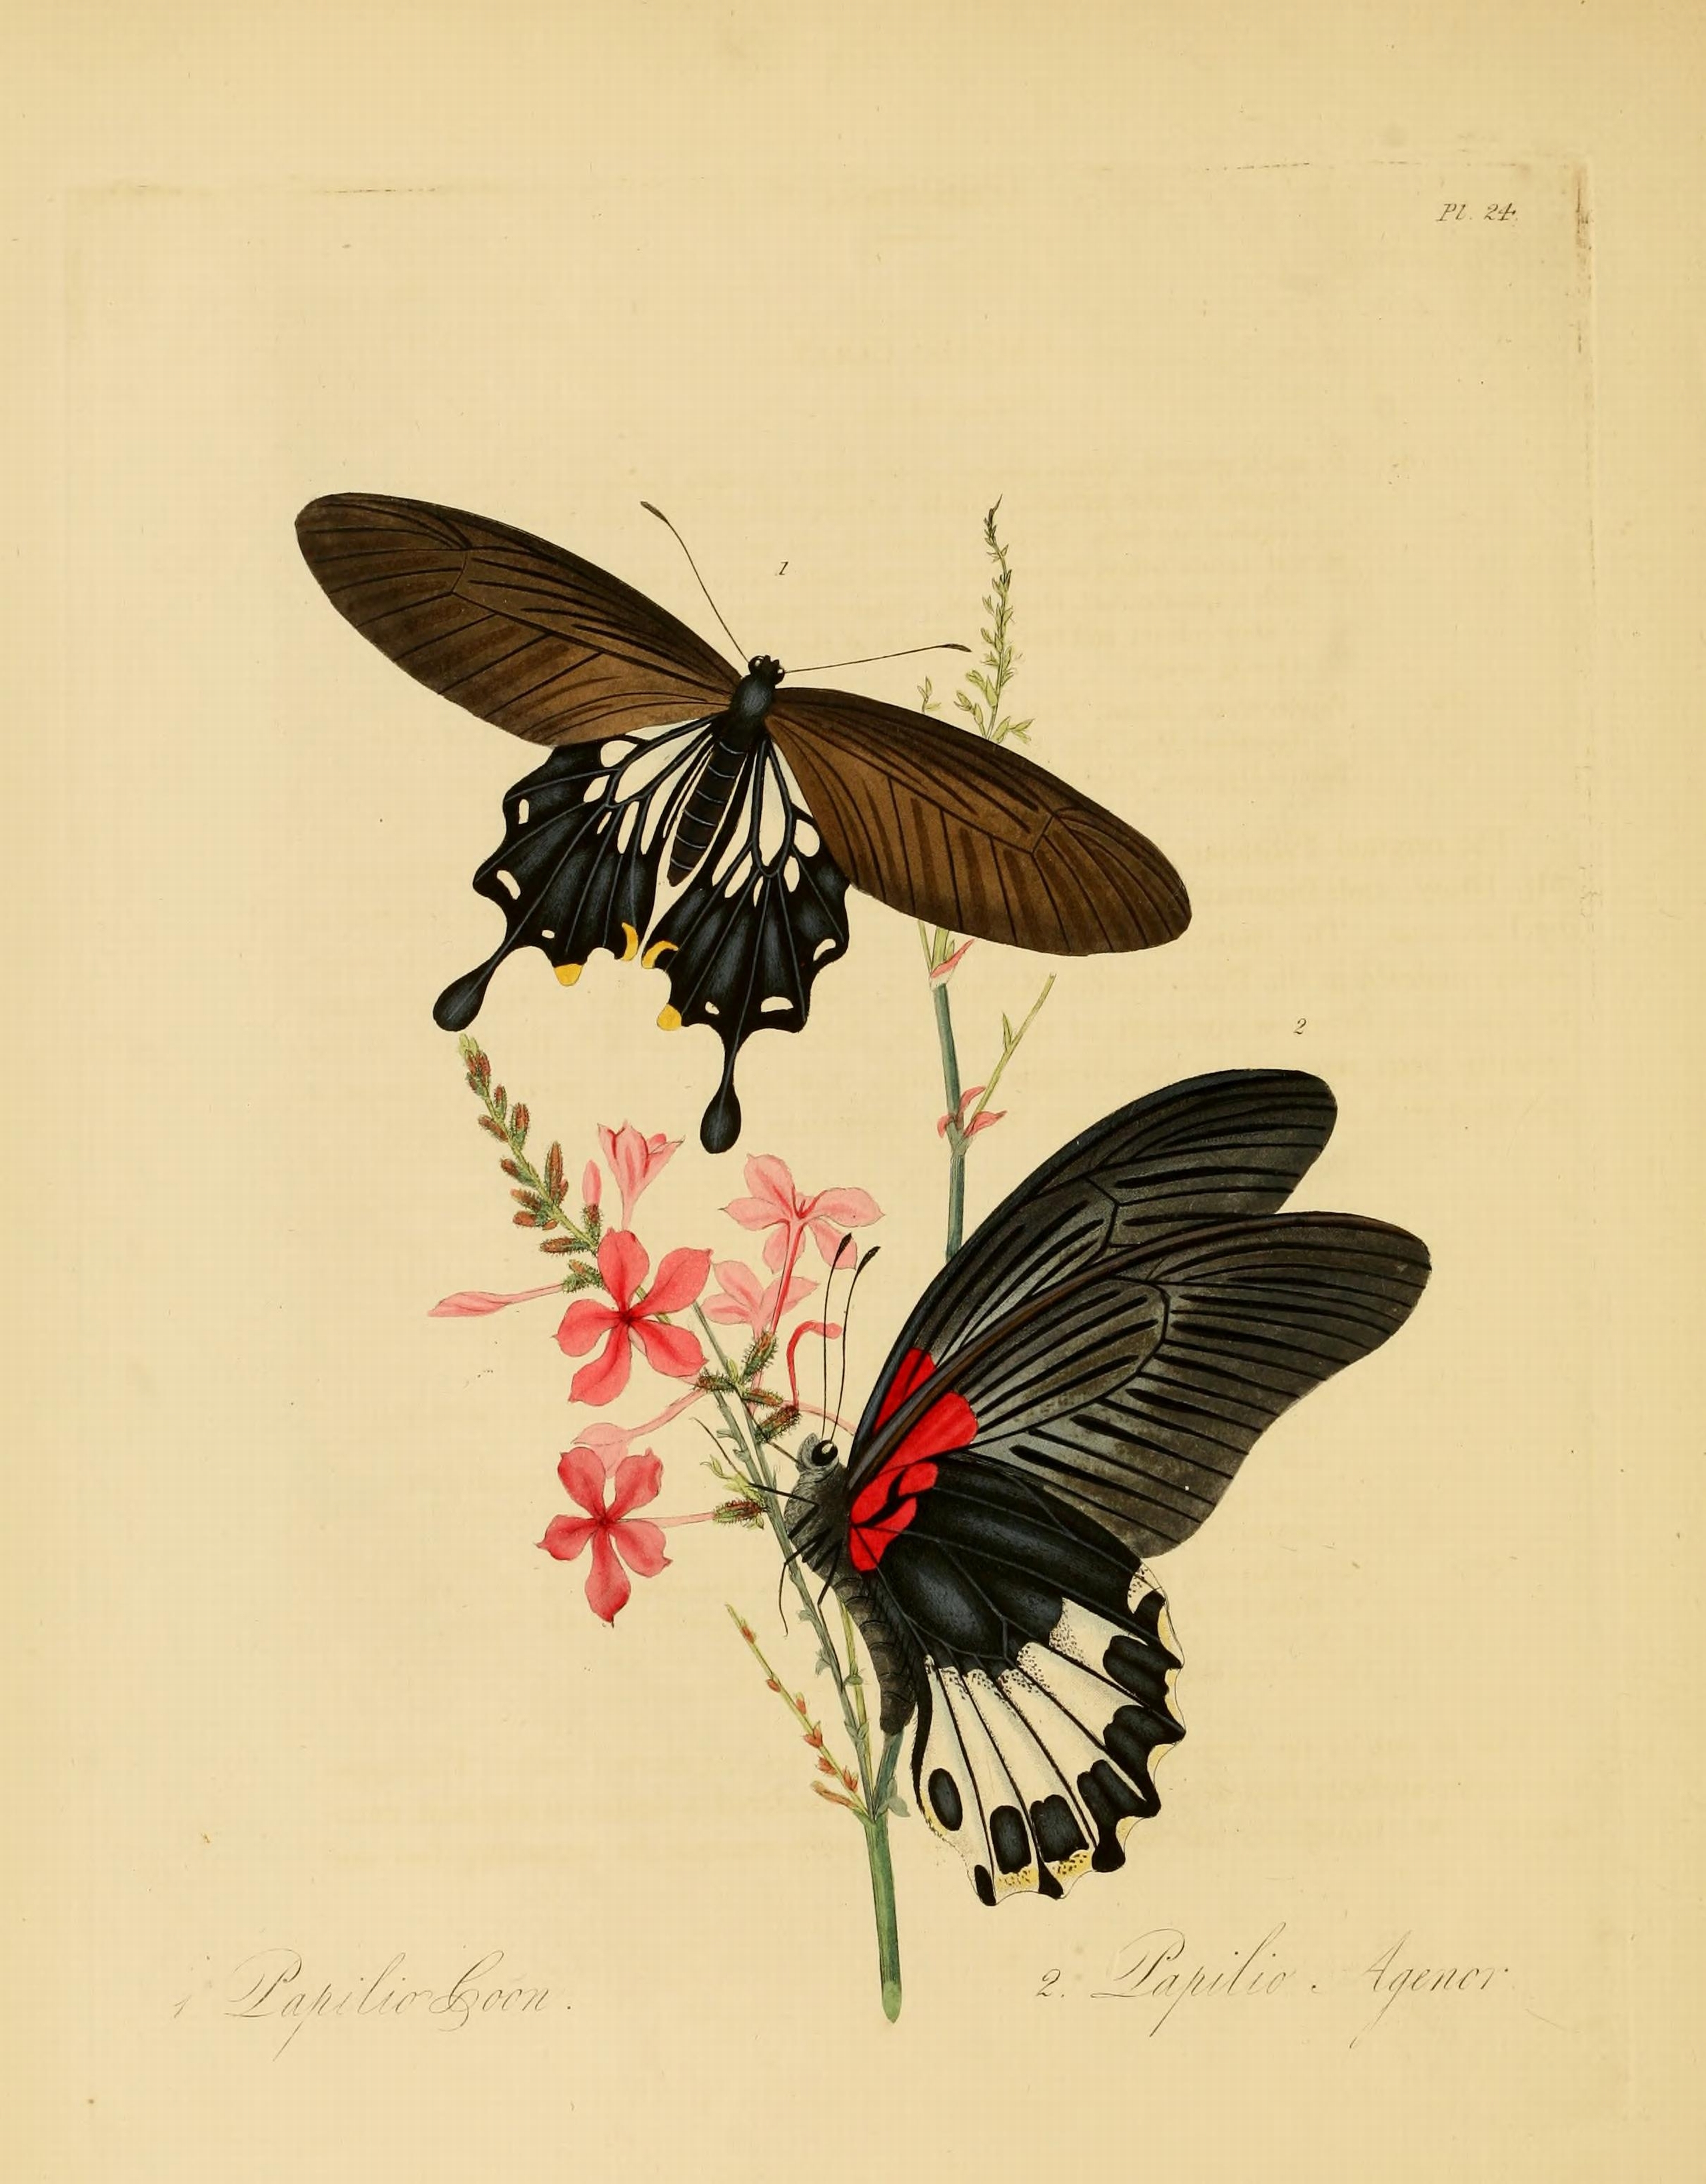 Donovan - Insects of China, 1838 - pl 24